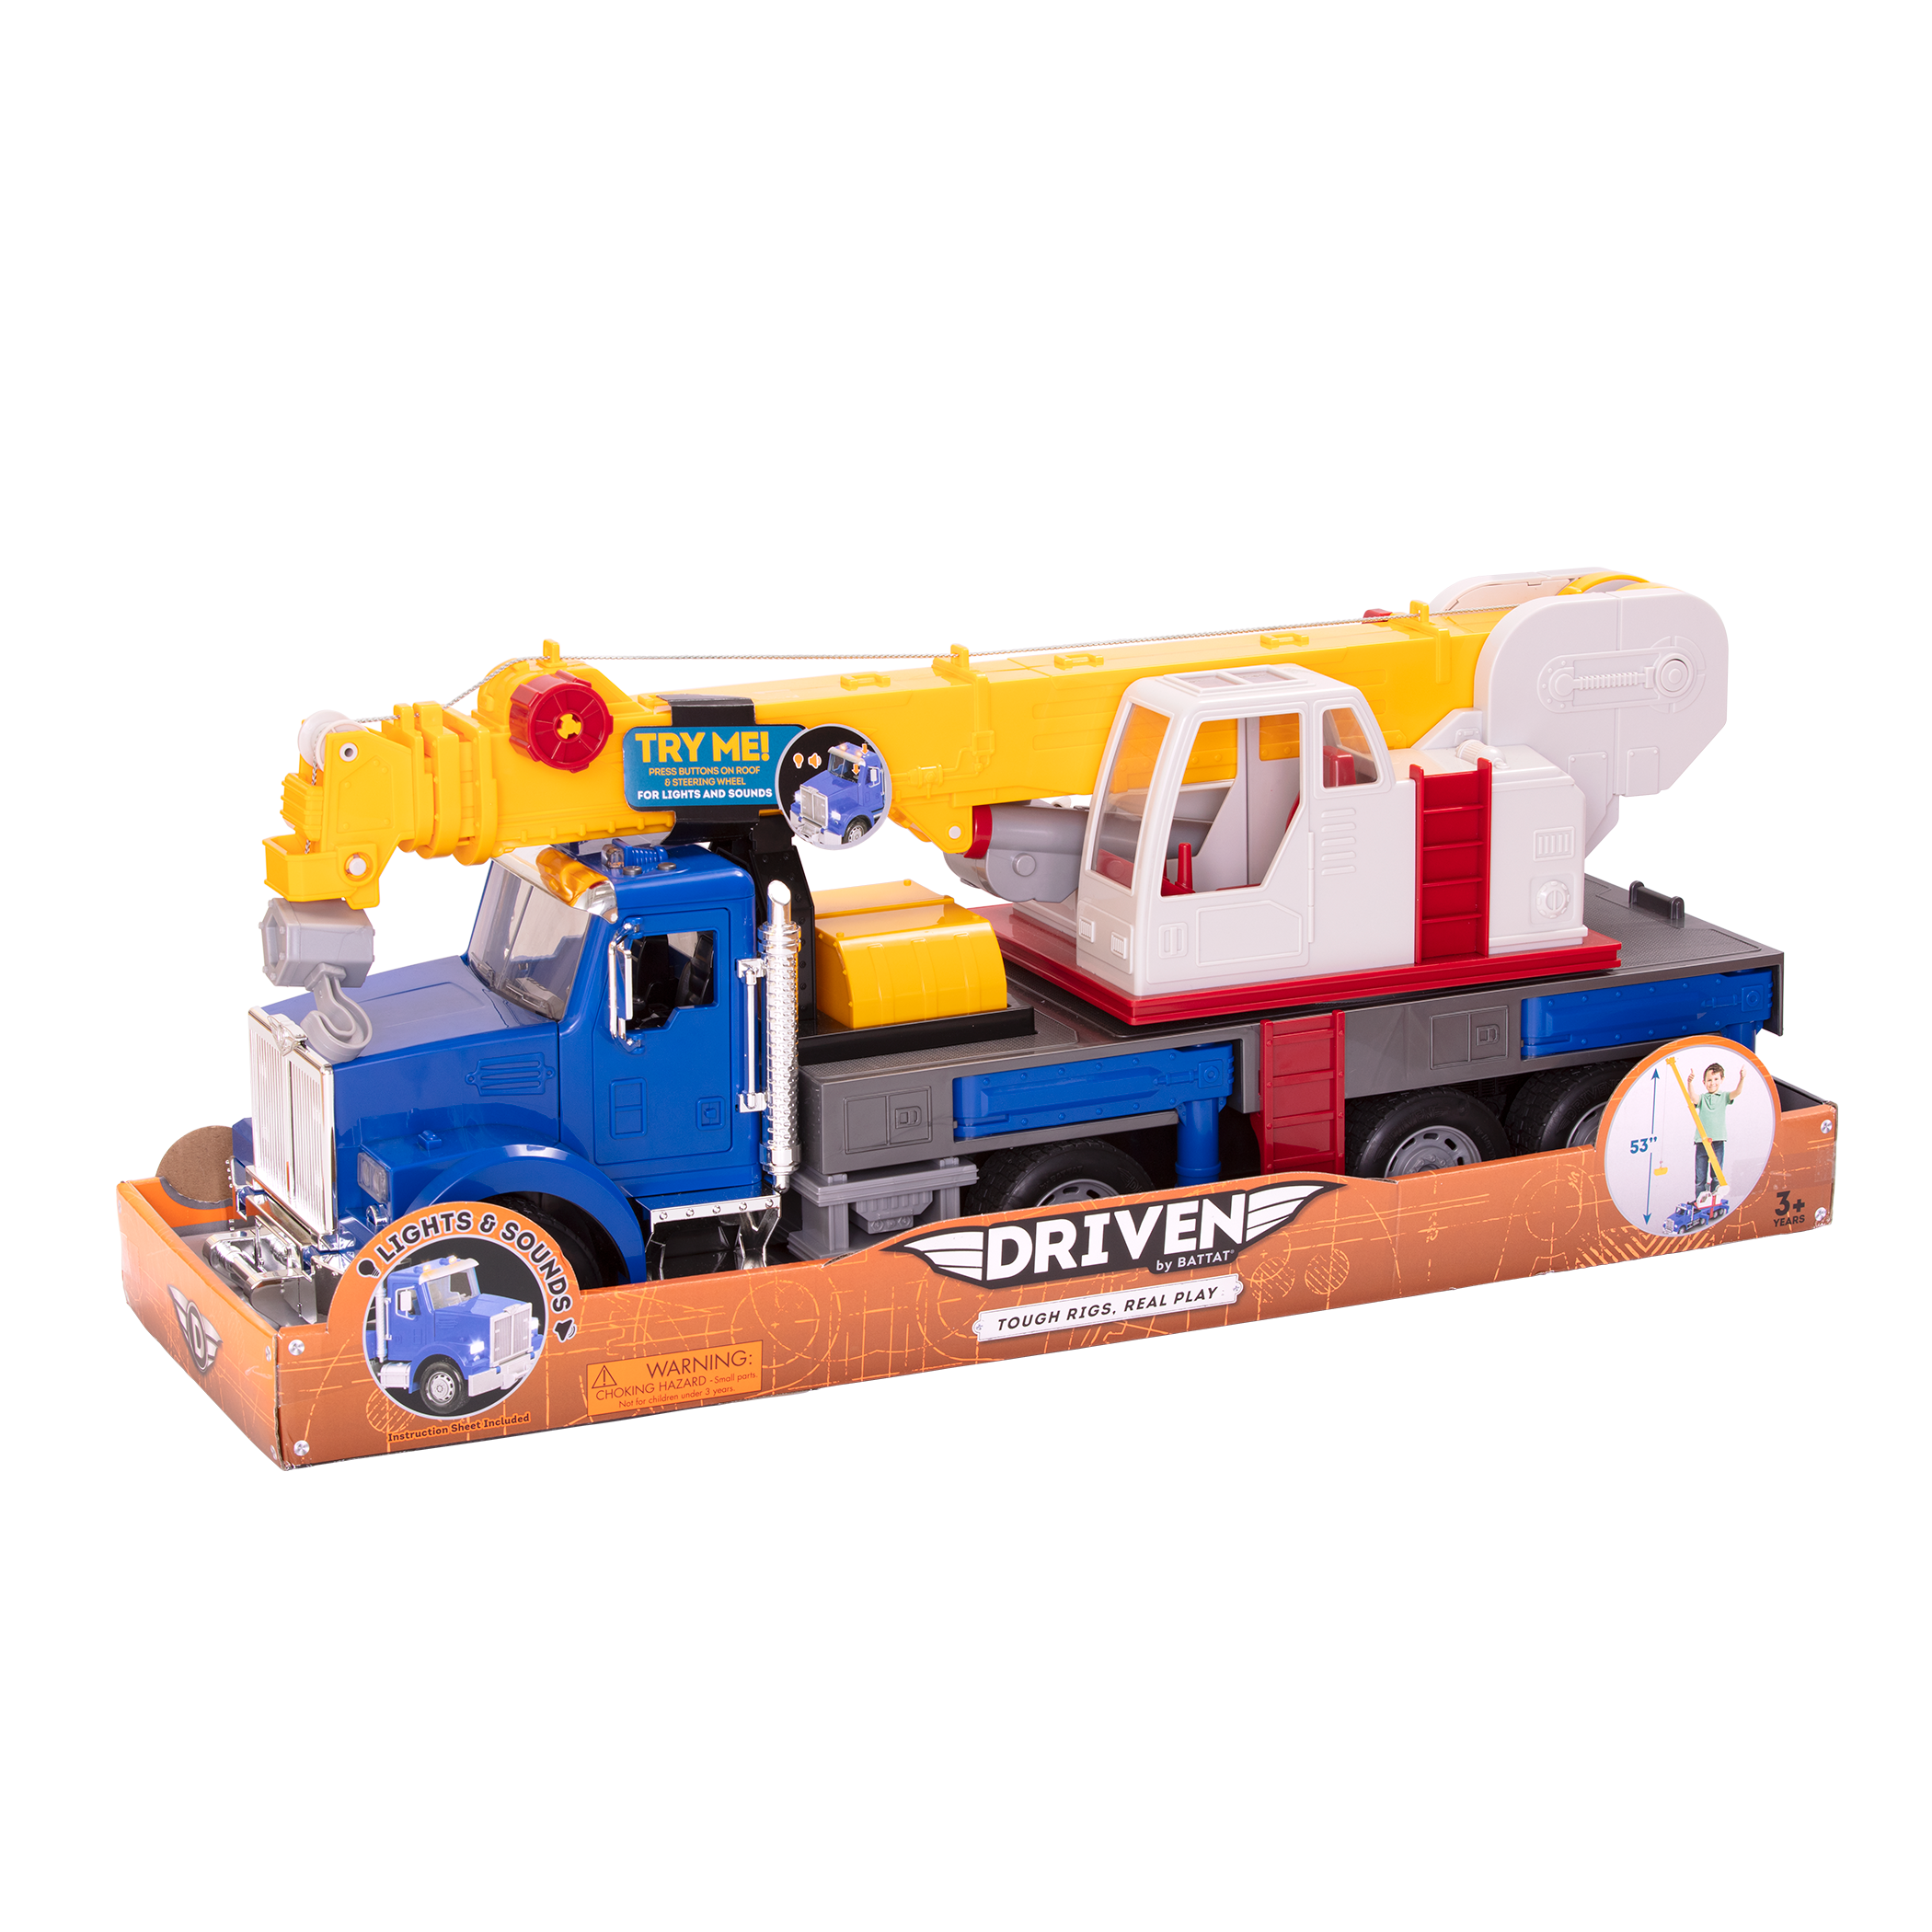 Toy vehicle assembly playset with functiona... Take-Apart Crane Truck Battat 